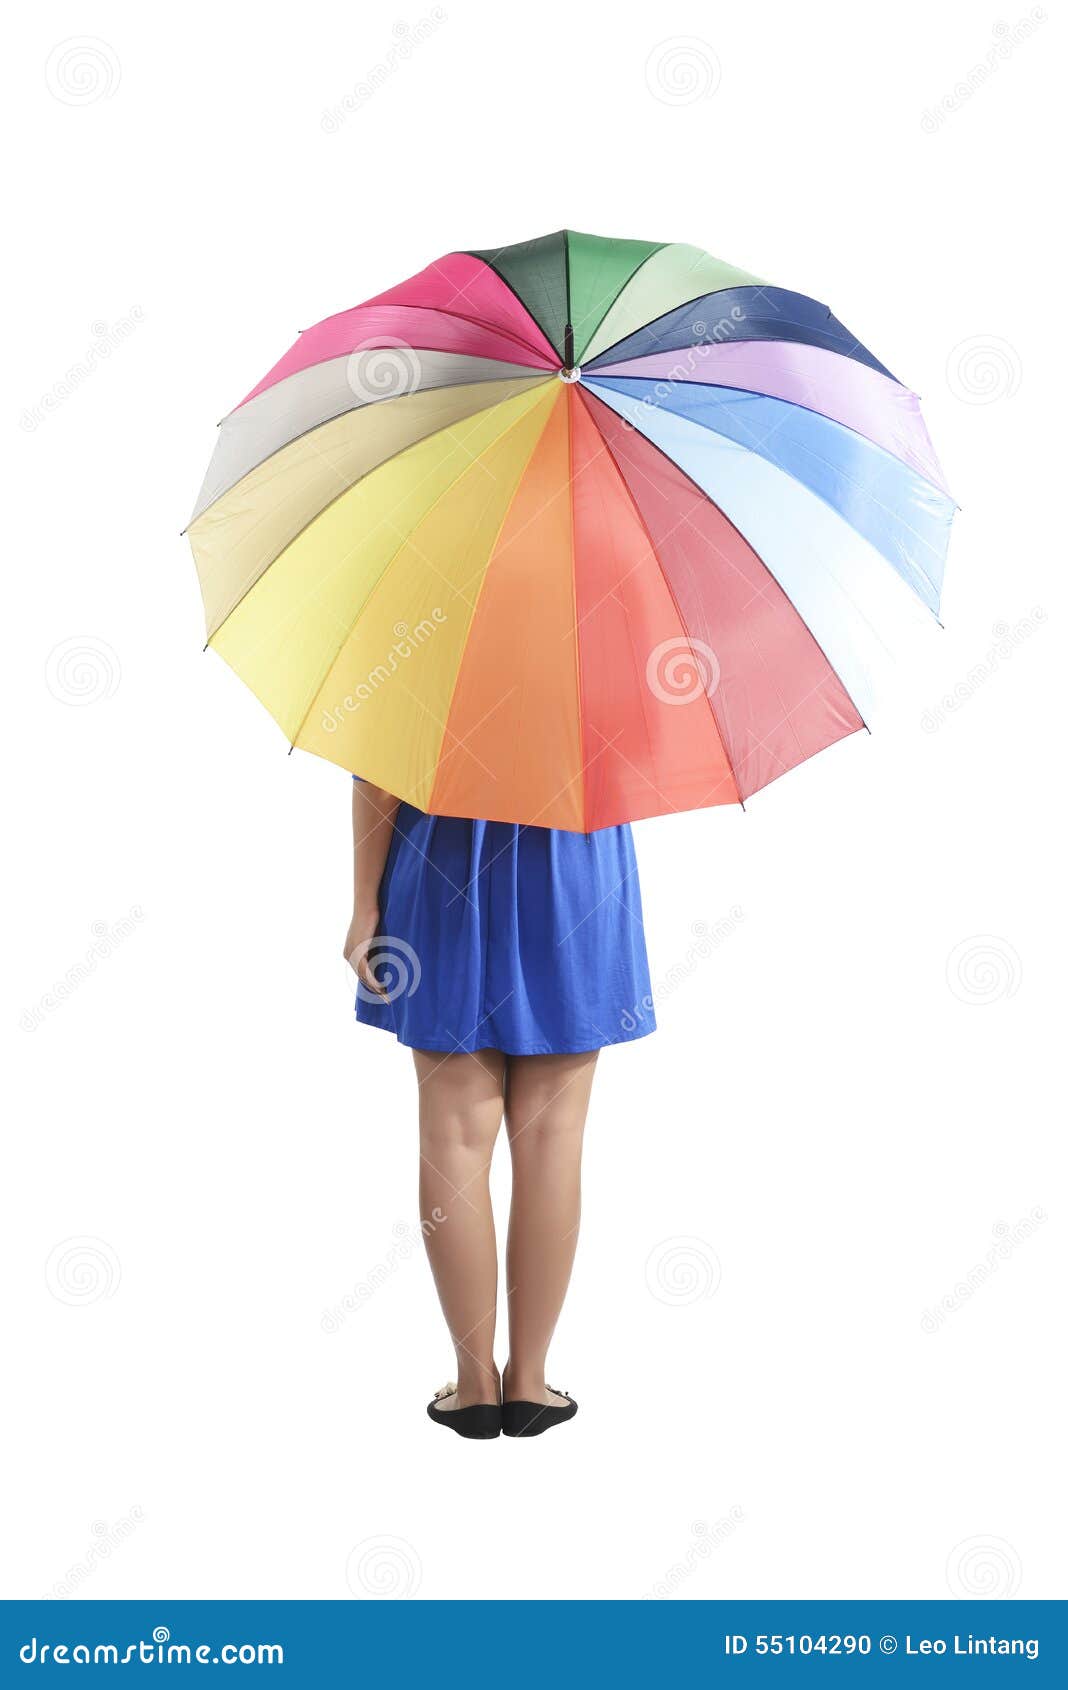 backview of woman holding colorful umbrella